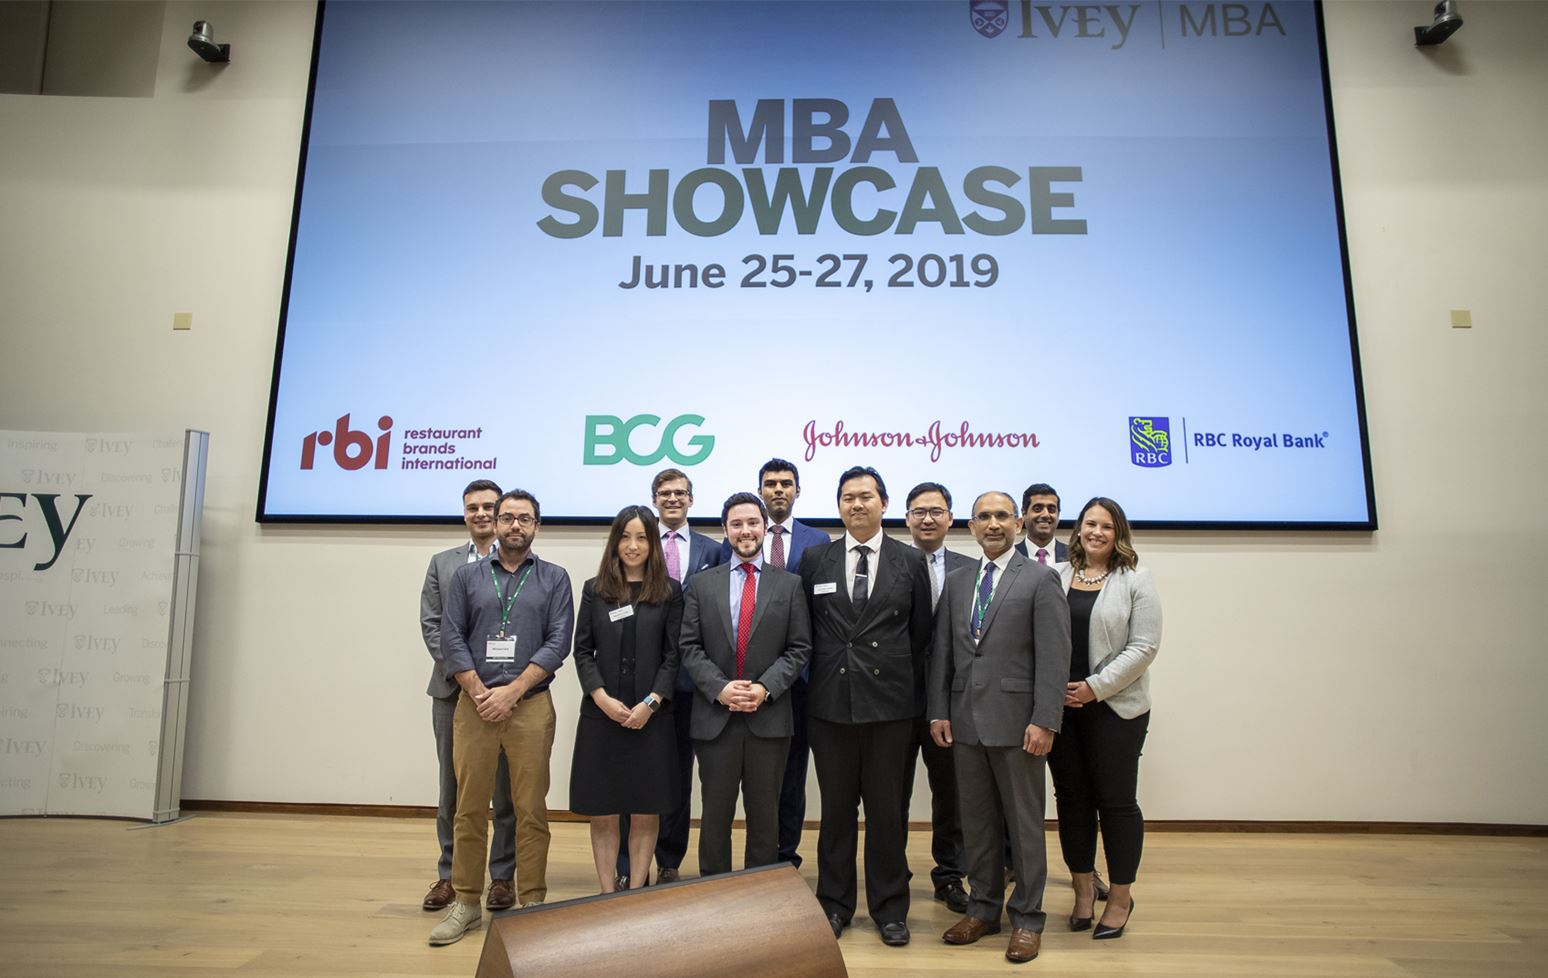 Managing disruptions in the workplace: The 2019 MBA Showcase